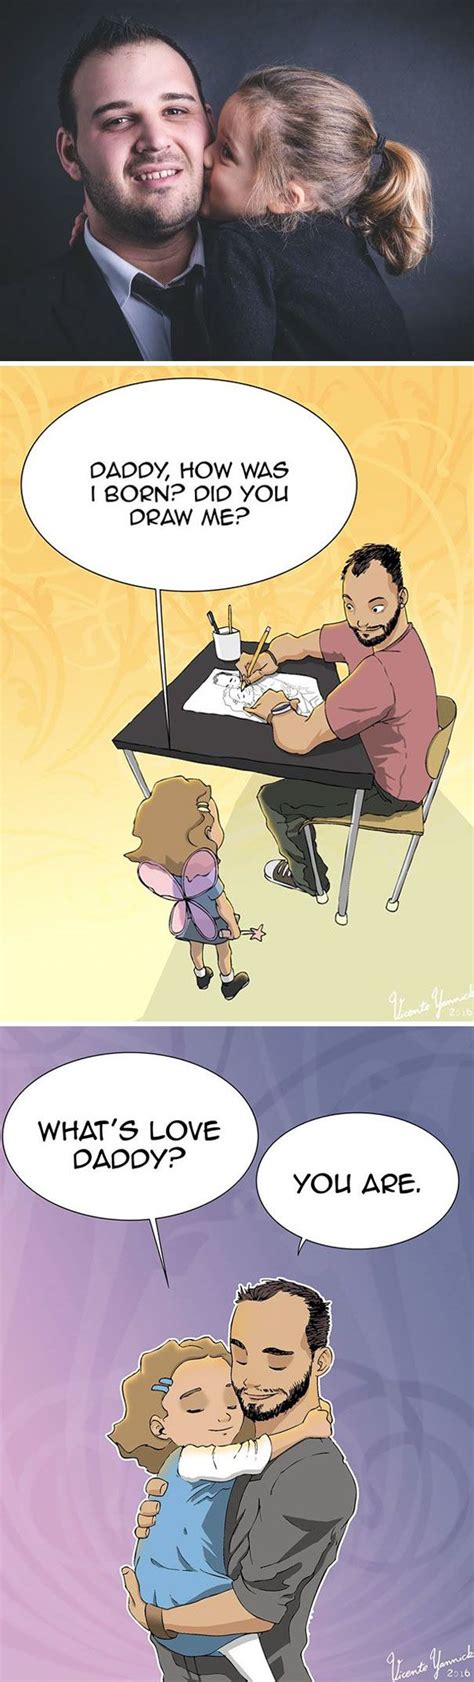 This Single Dad Is Making Heartwarming Illustrations Of Everyday Life